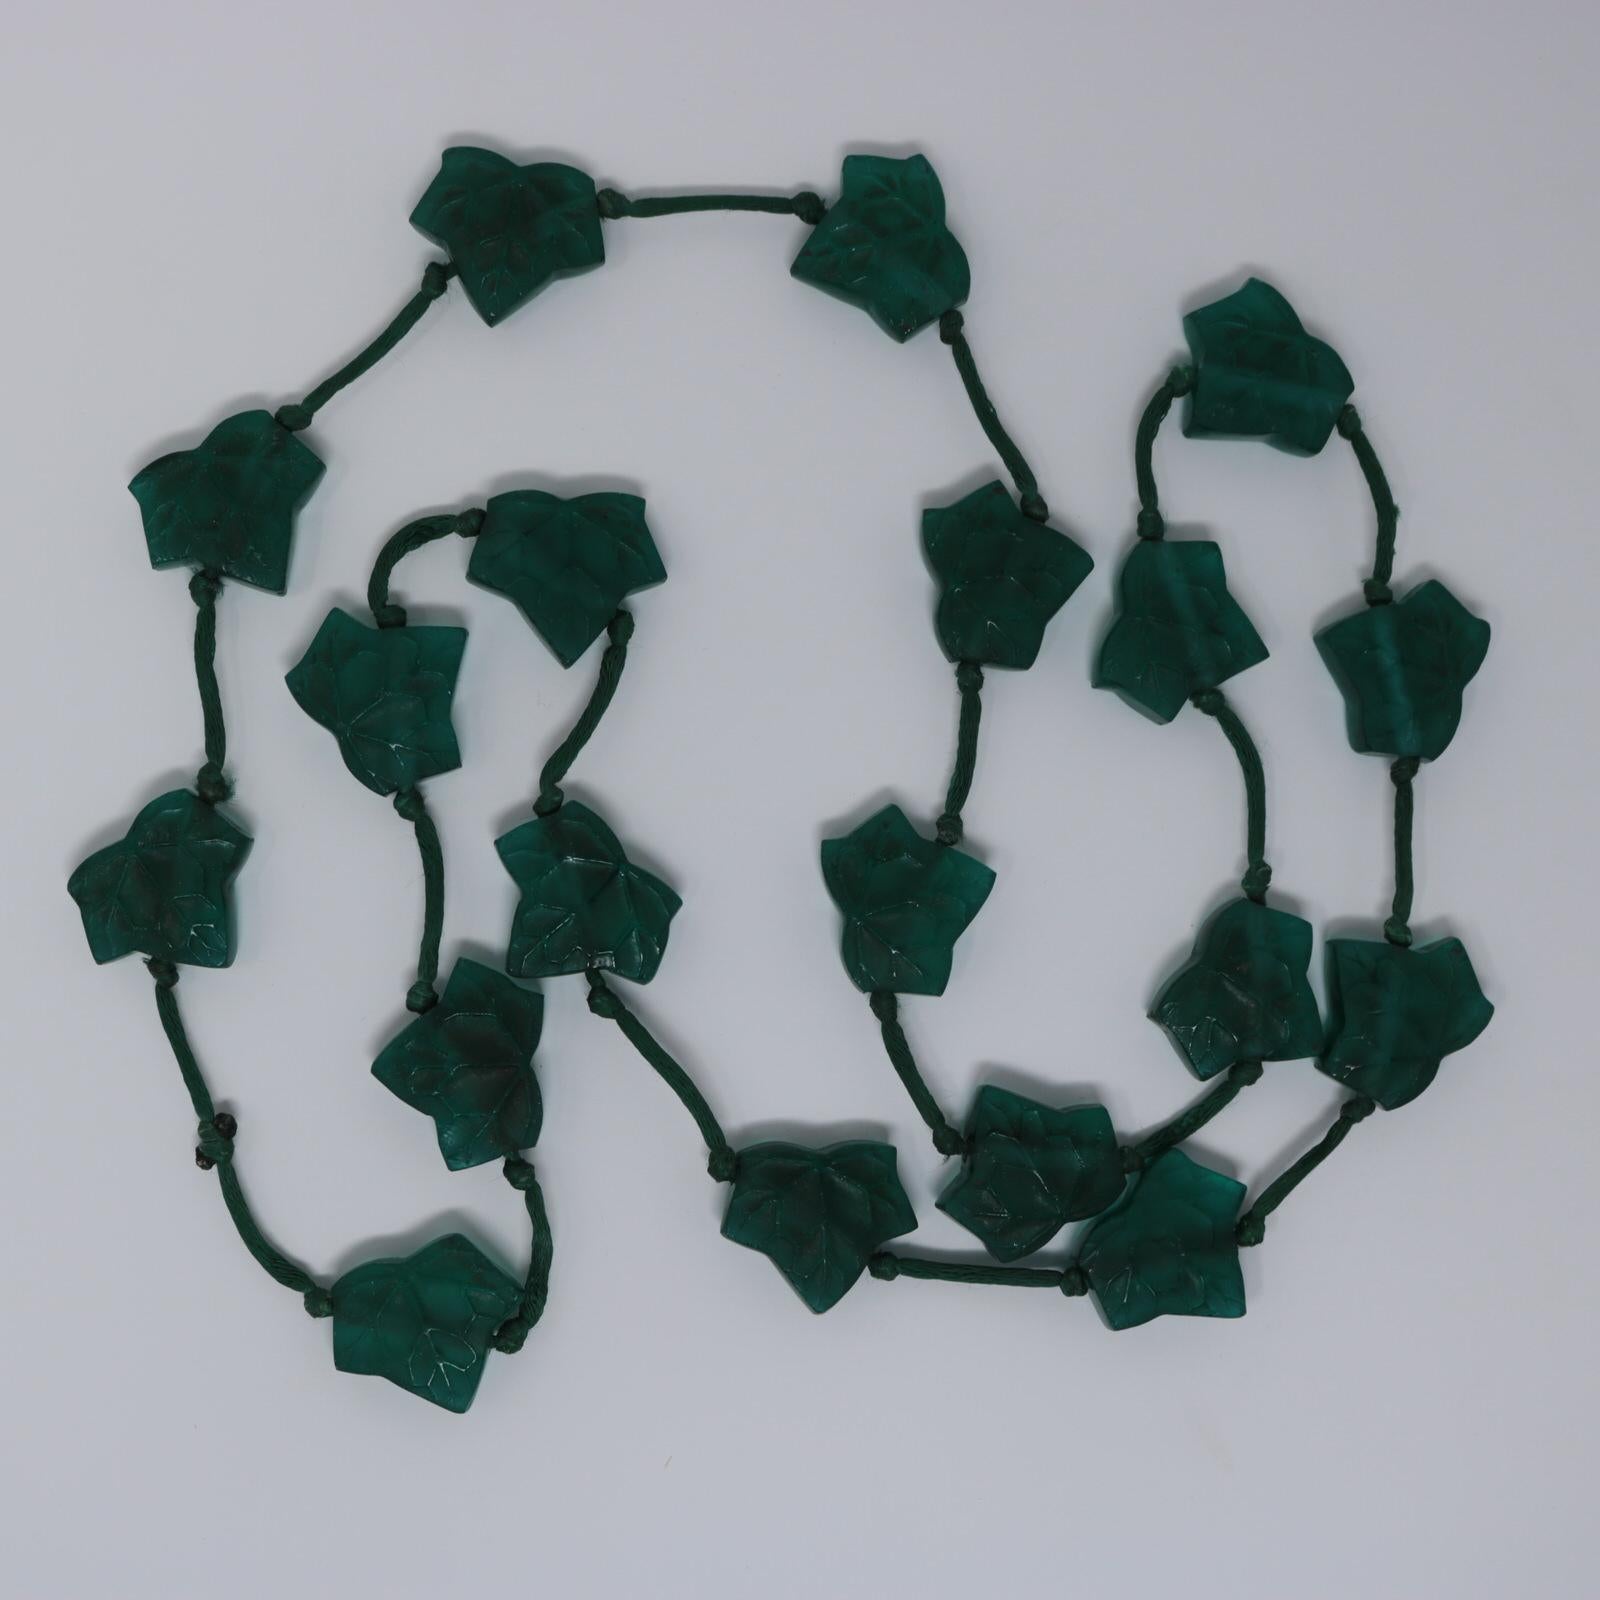 Rene Lalique green glass 'Feuilles De Lierre' leaves necklace. Necklace features 19 green glass ivy leaves, strung onto a silk cord. Book reference: Marcilhac 1505. Dimensions given are for each leaf. The total length of the necklace is 95cm